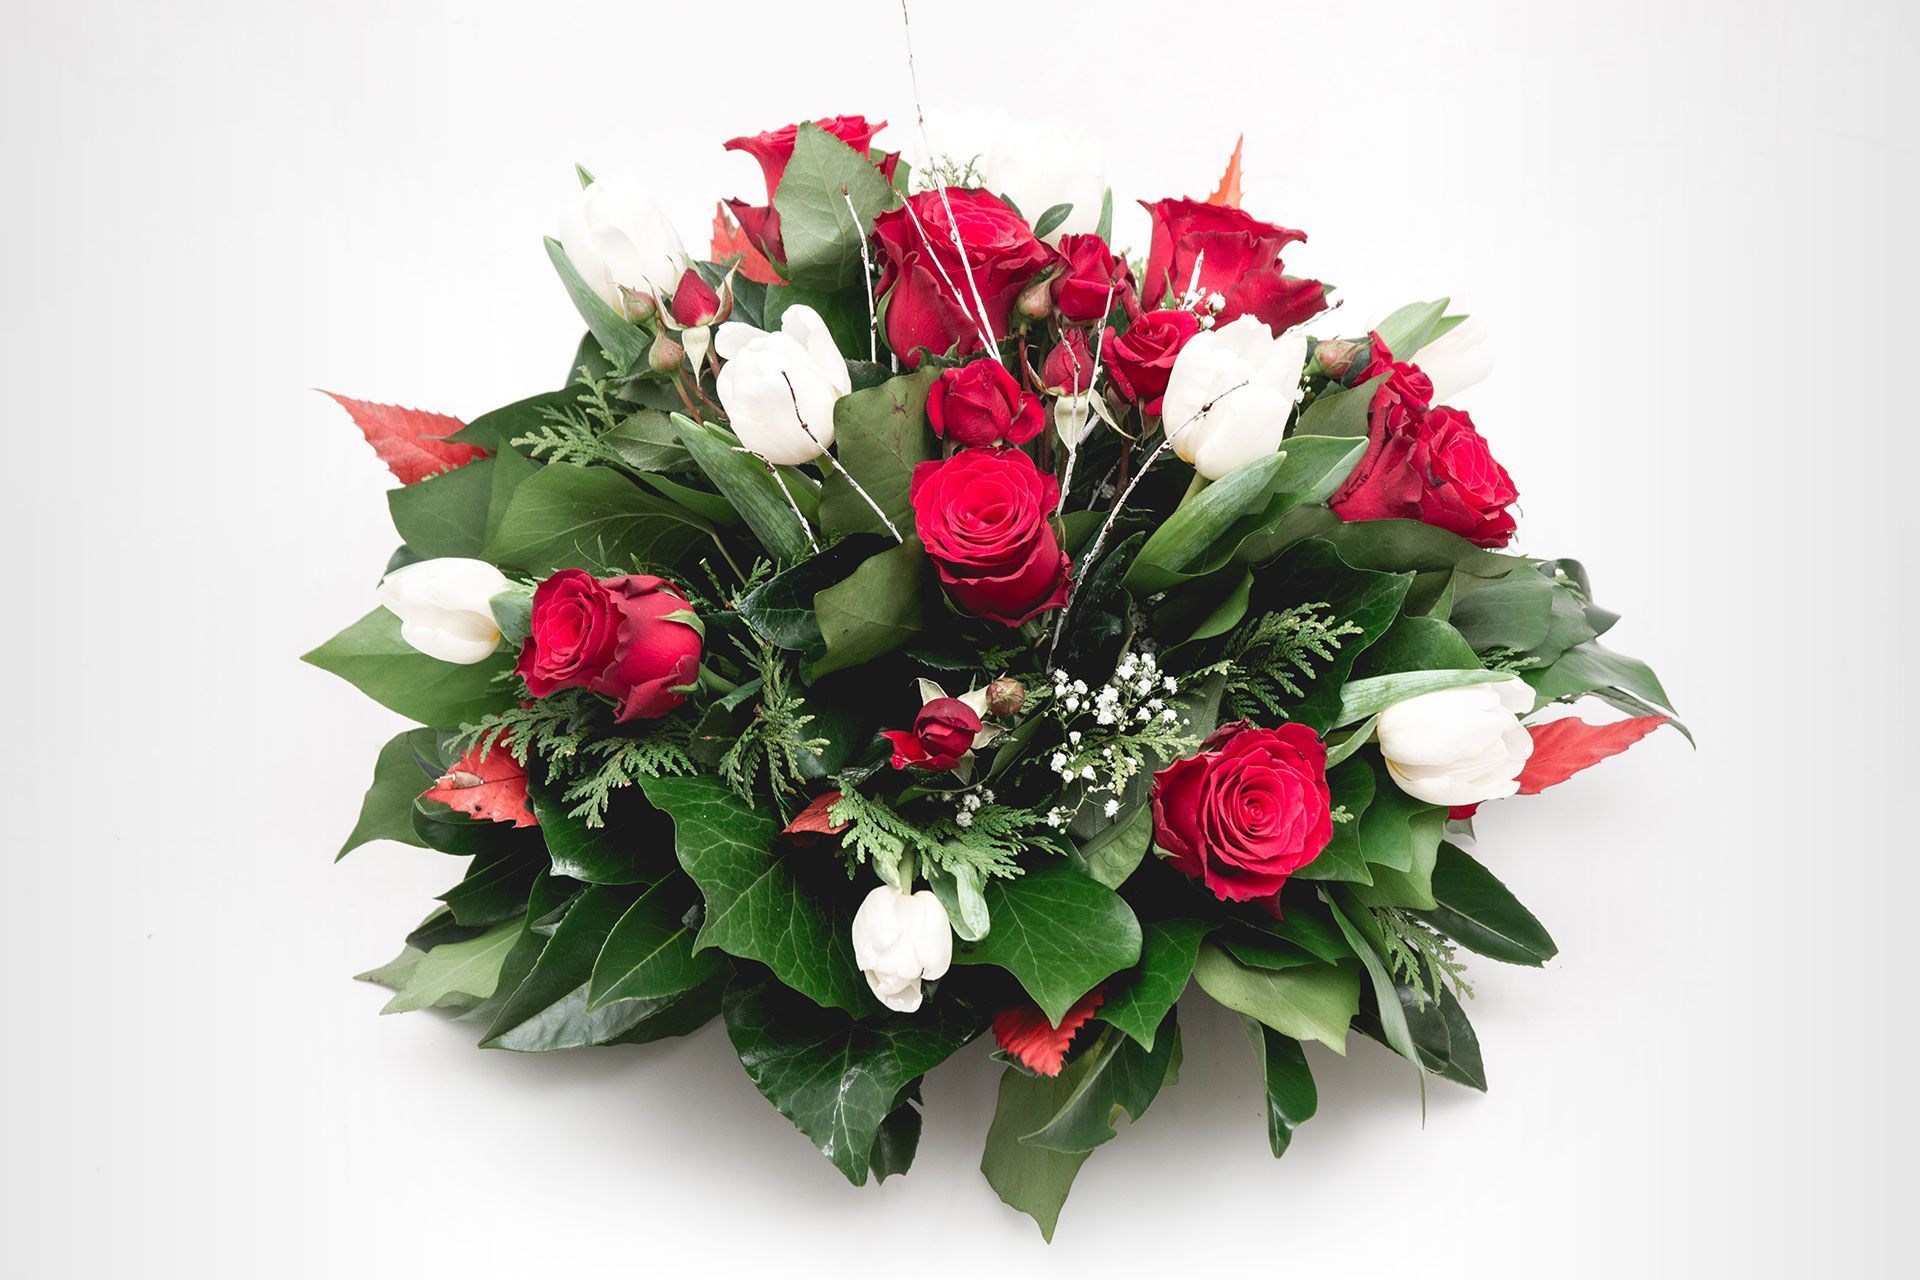 A bouquet of red roses and white tulips on a white background